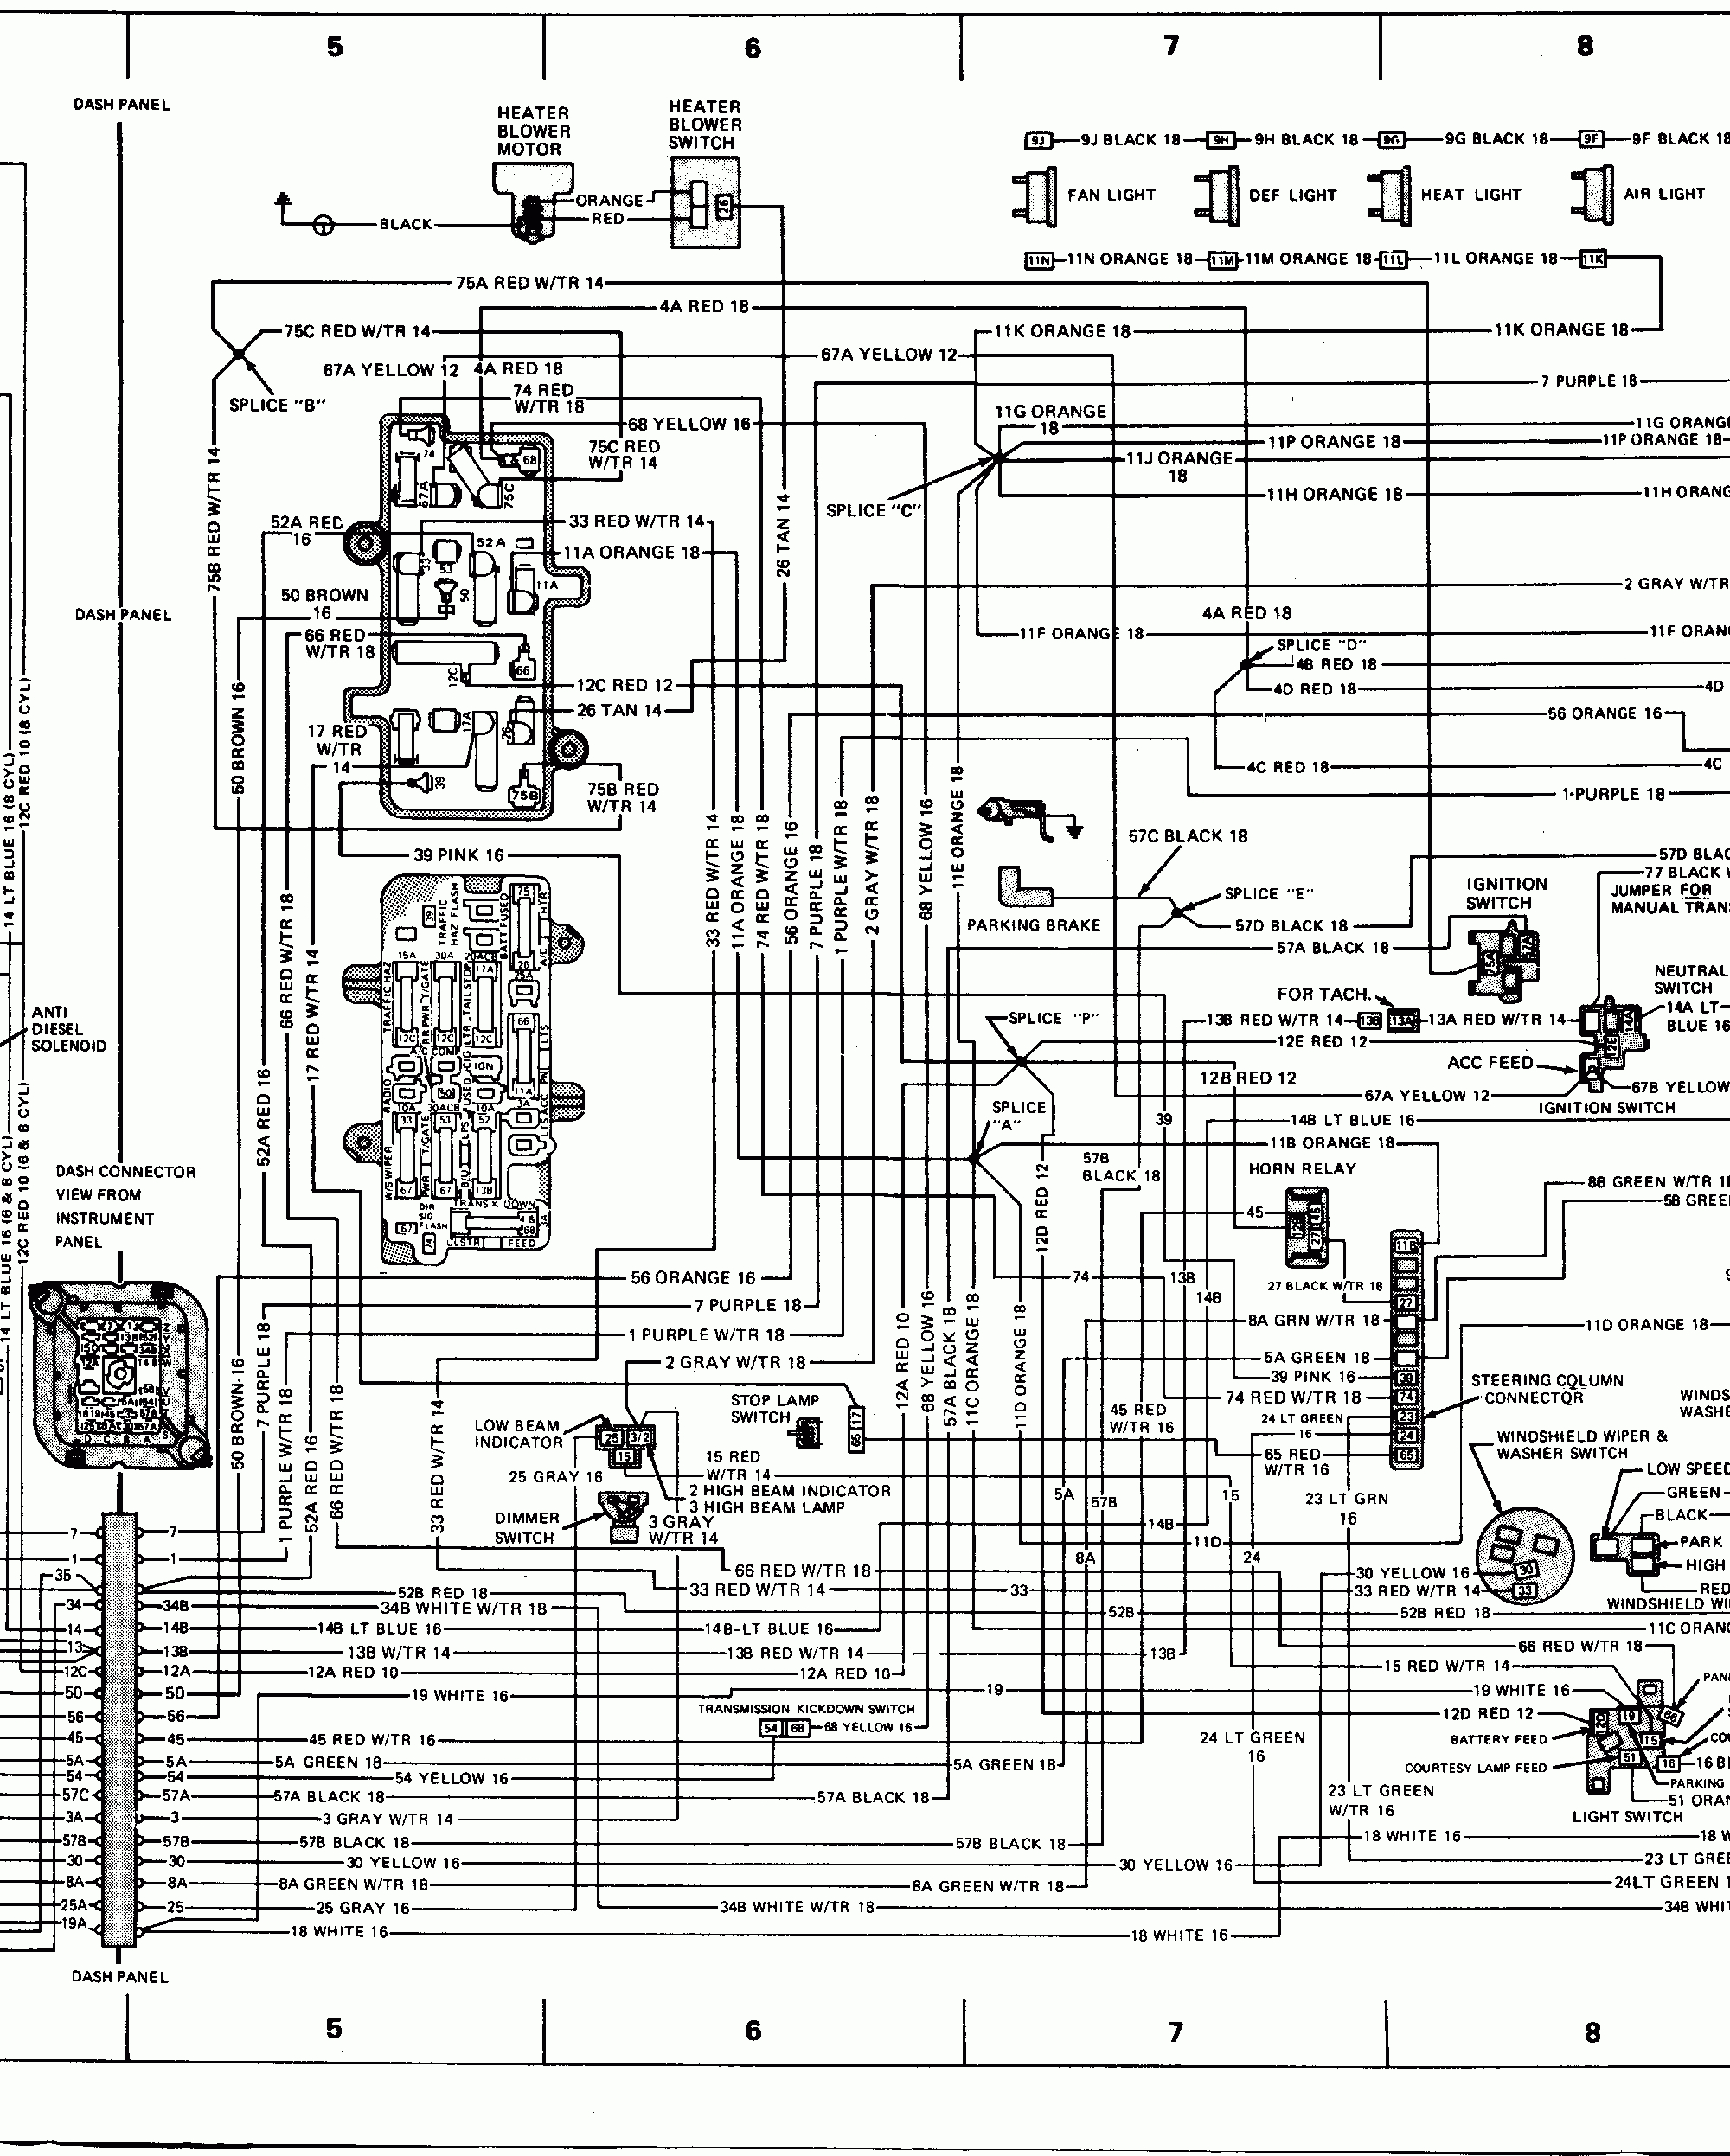 Painless Wiring Harness Diagram 73 Jeep - Wiring Diagrams Hubs - Painless Wiring Harness Diagram